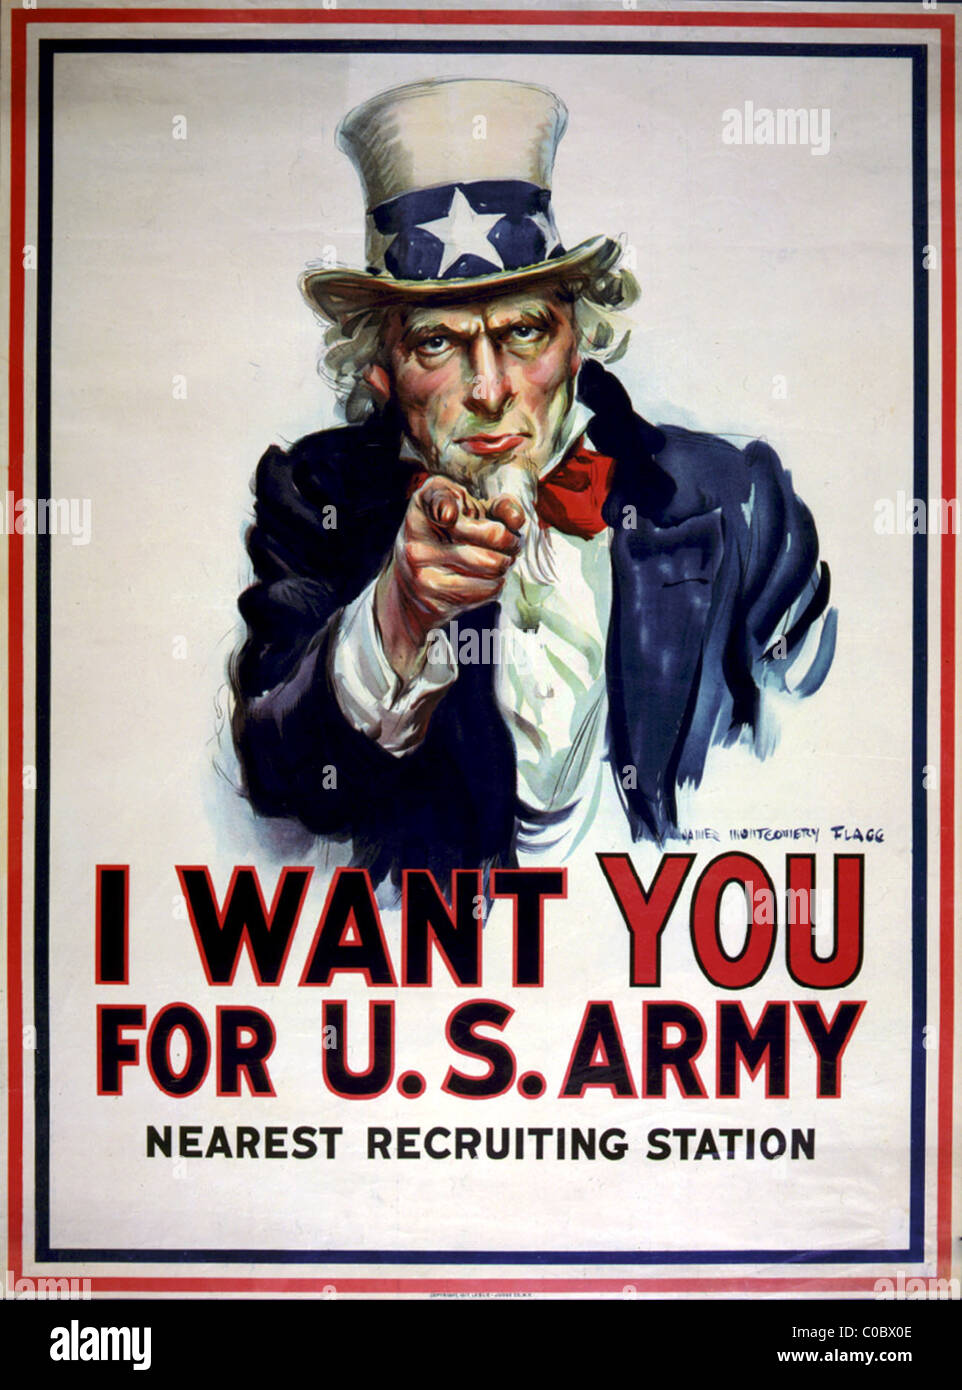 Uncle Sam recruitment poster for U.S. Army Stock Photo